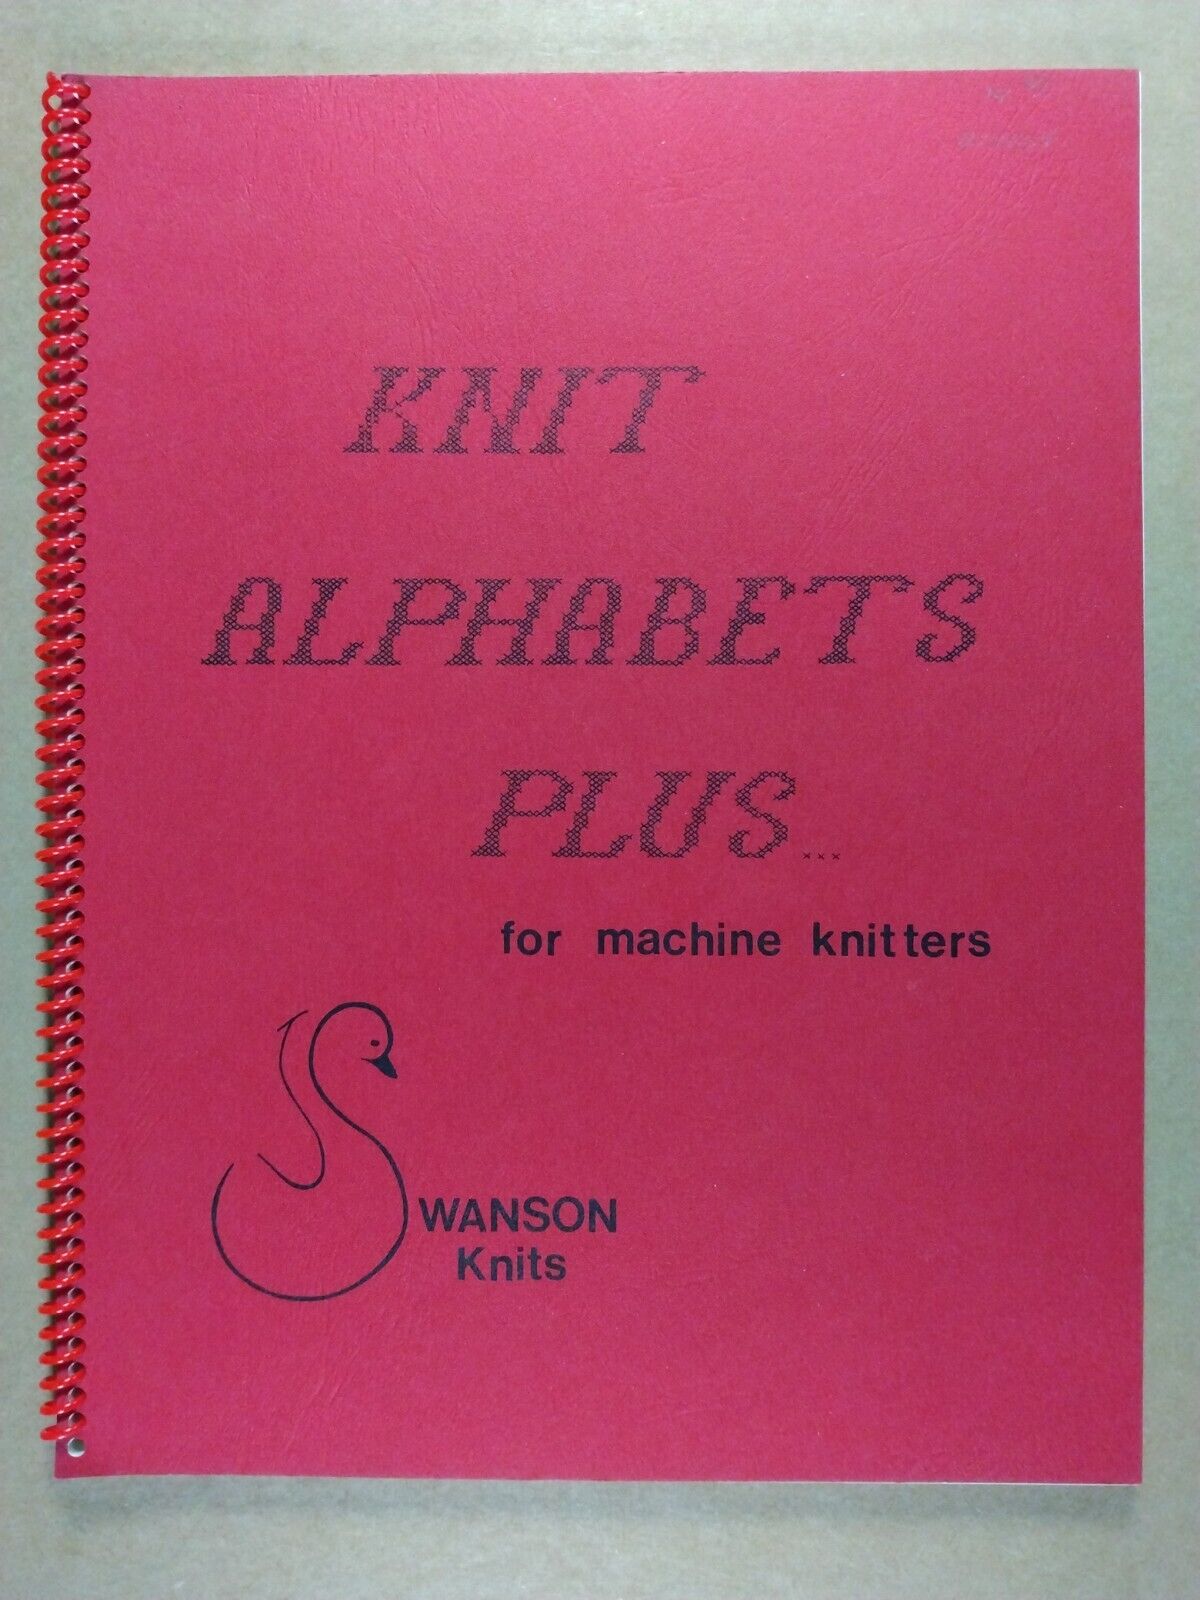 Knit Alphabets Plus For Machine Knitters By Swanson Knits 1984 Book